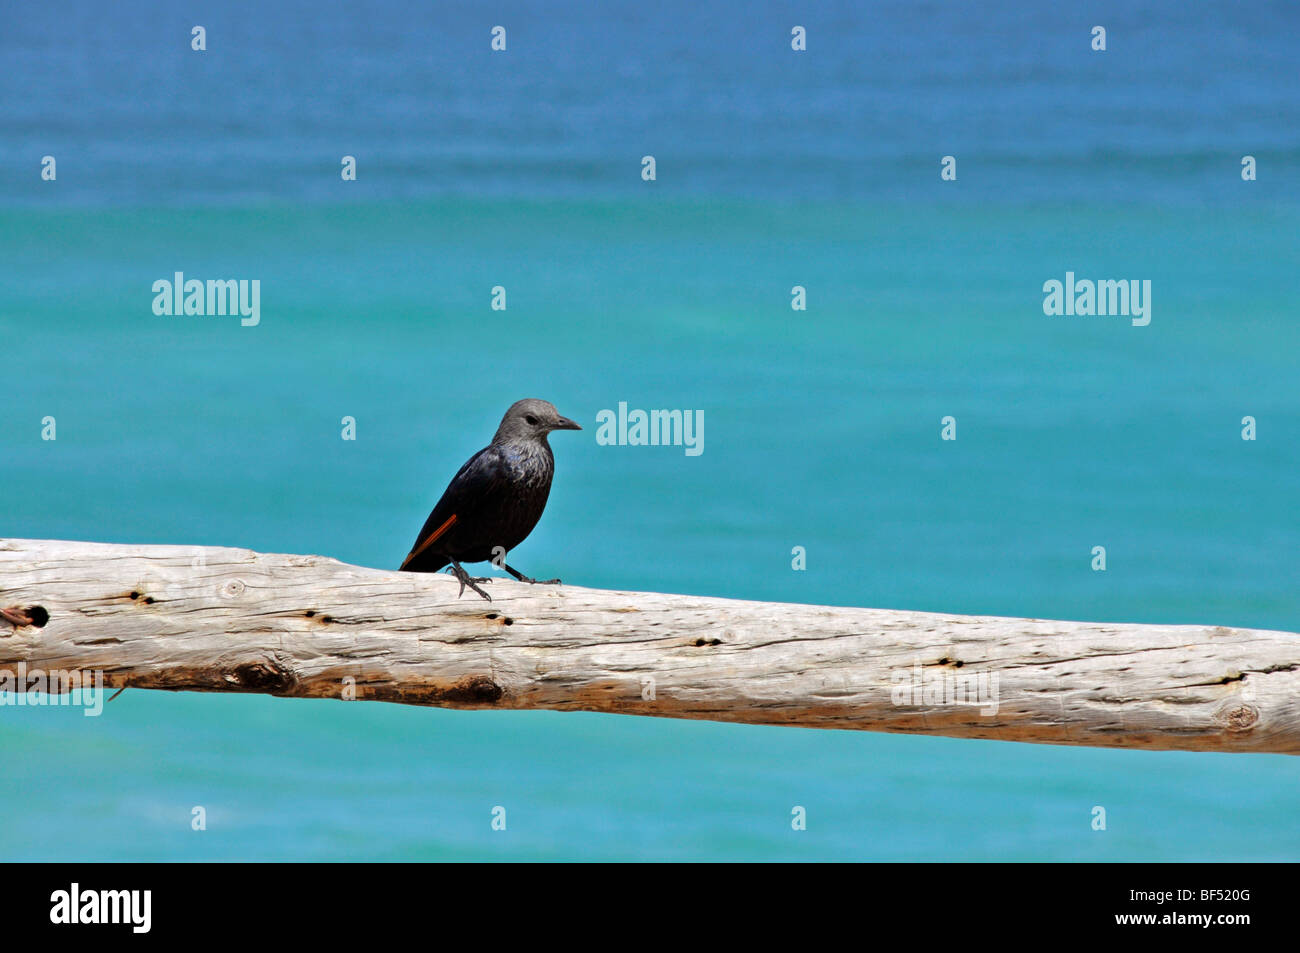 Bird perched on a piece of wood, De Hoop Nature Reserve, South Africa, Africa Stock Photo